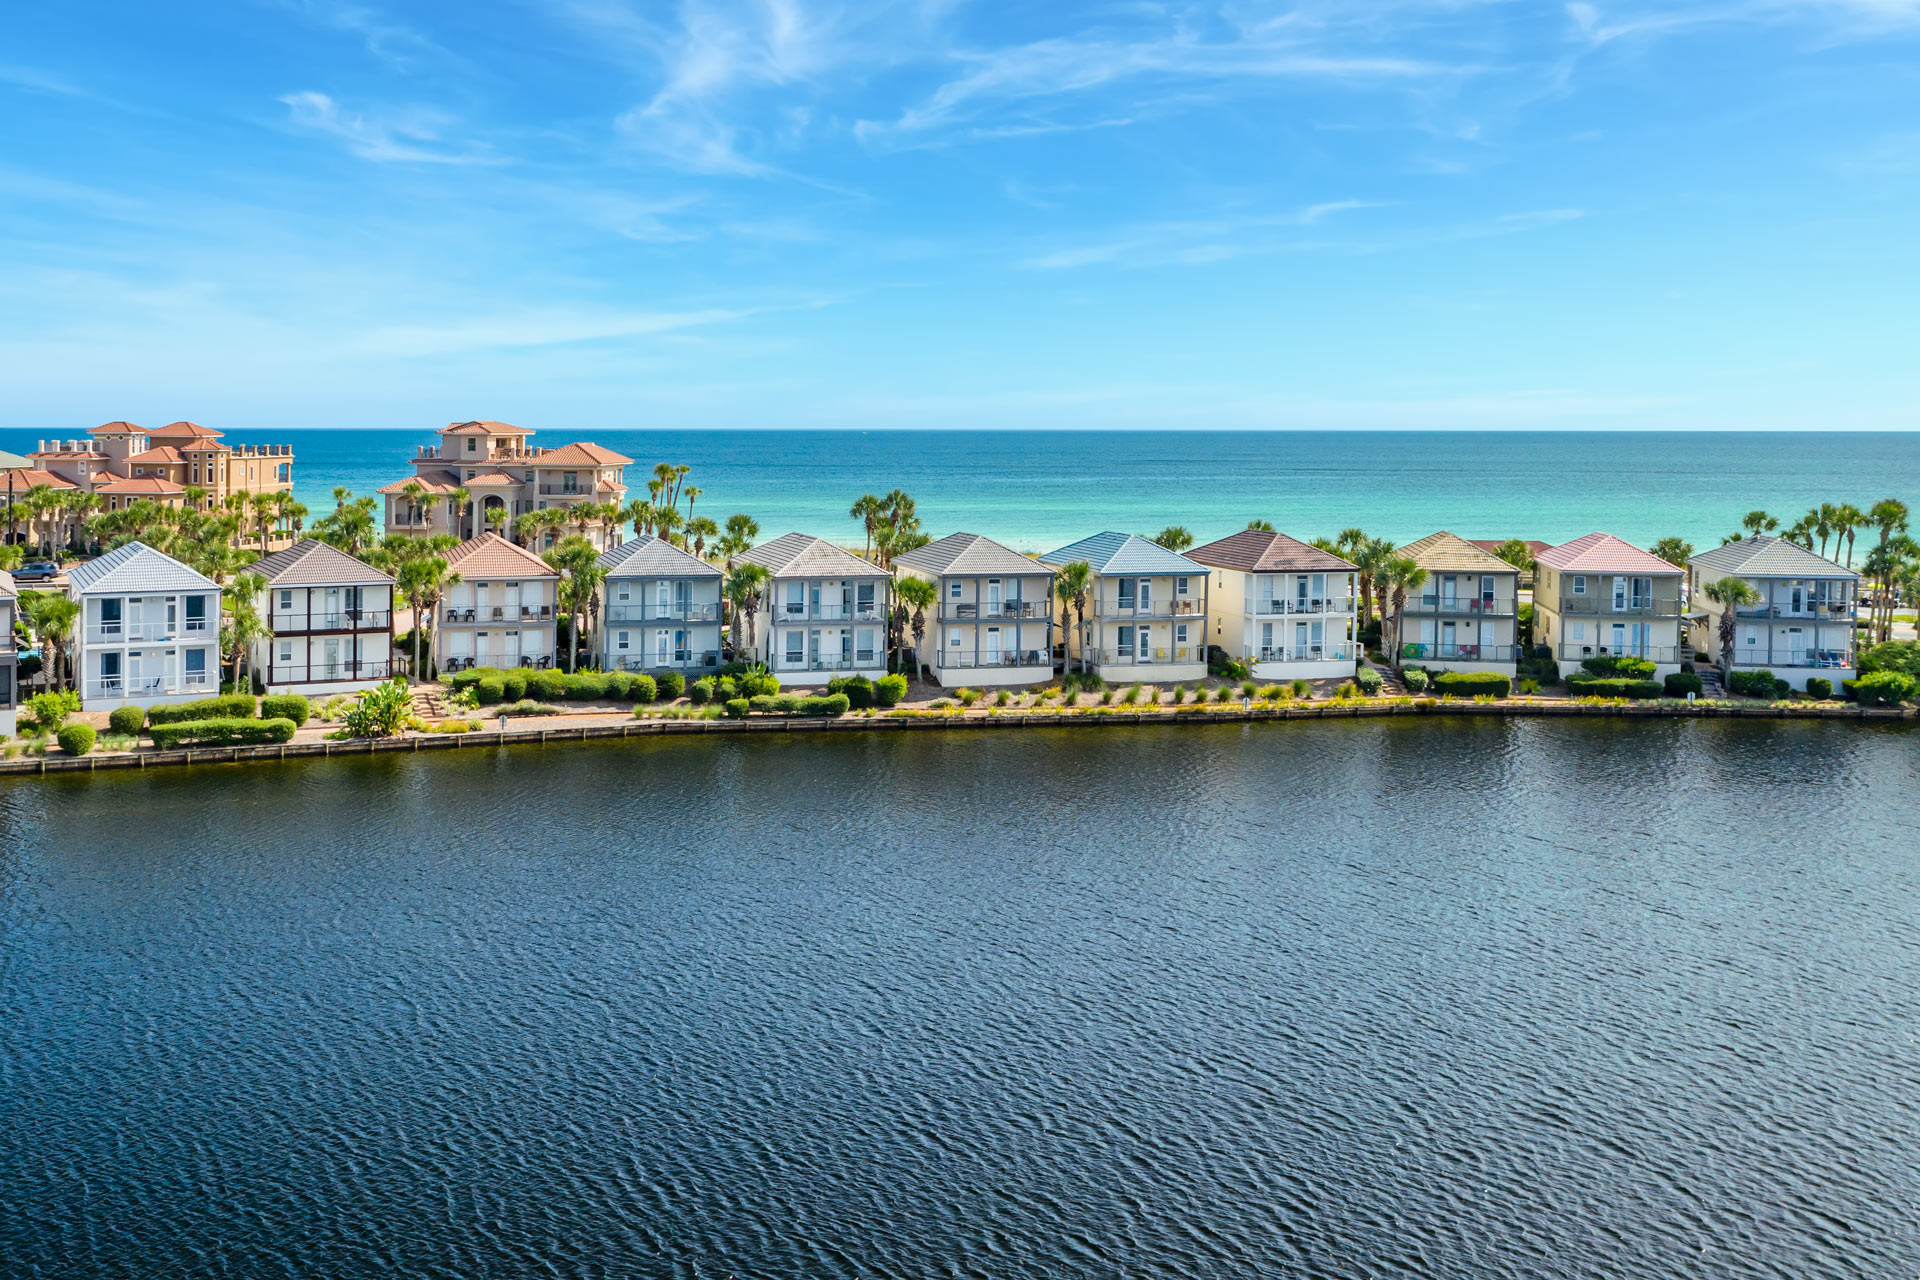 All About The View: Gulf Front Vacation Rental 10 Bedroom 10 Full